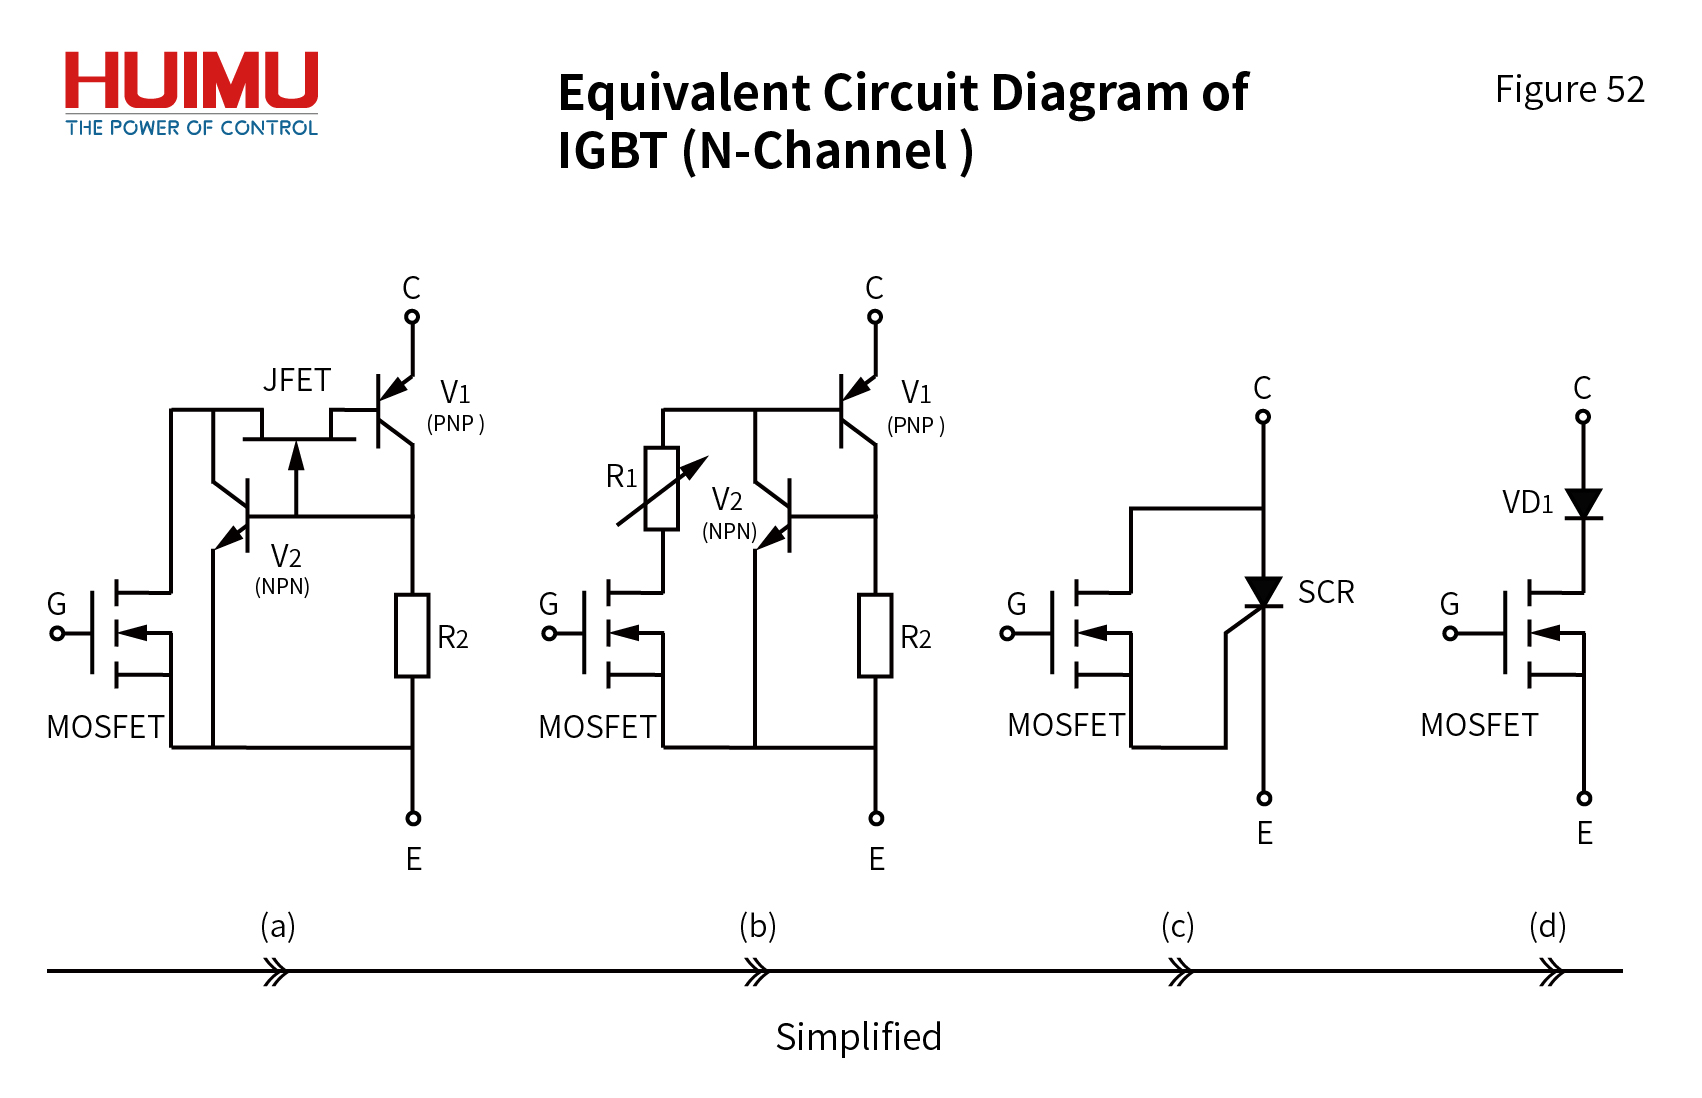 Equivalent Circuit Diagram of IGBT(N-Channel)